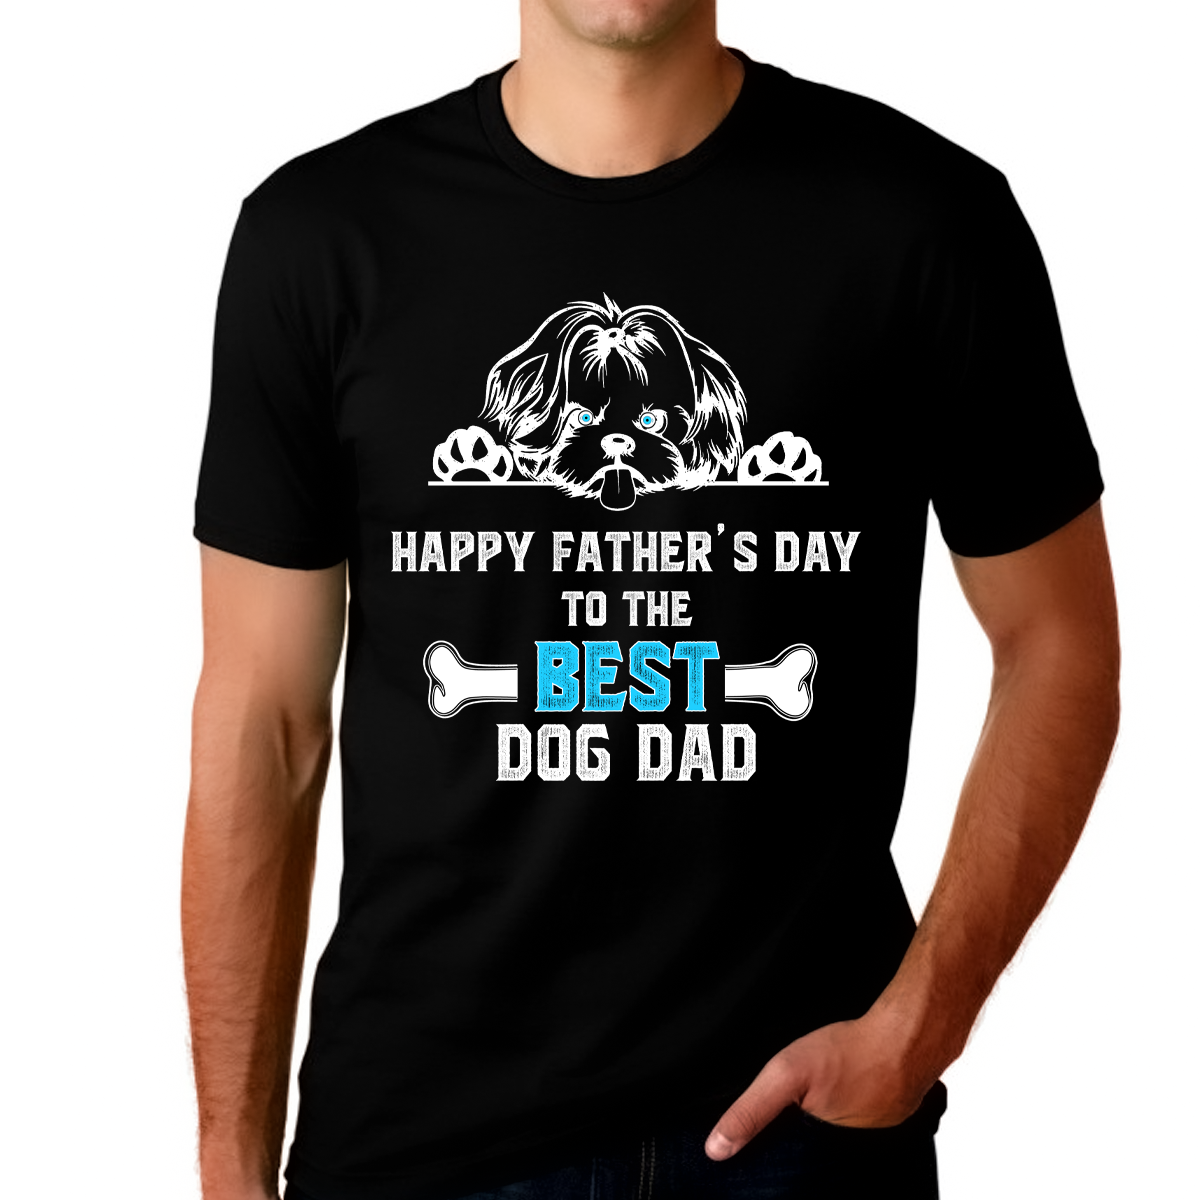 Best Dog Dad Fathers Day Shirt for Men - Fathers Day Gift Shirt - Funny Dad Shirts